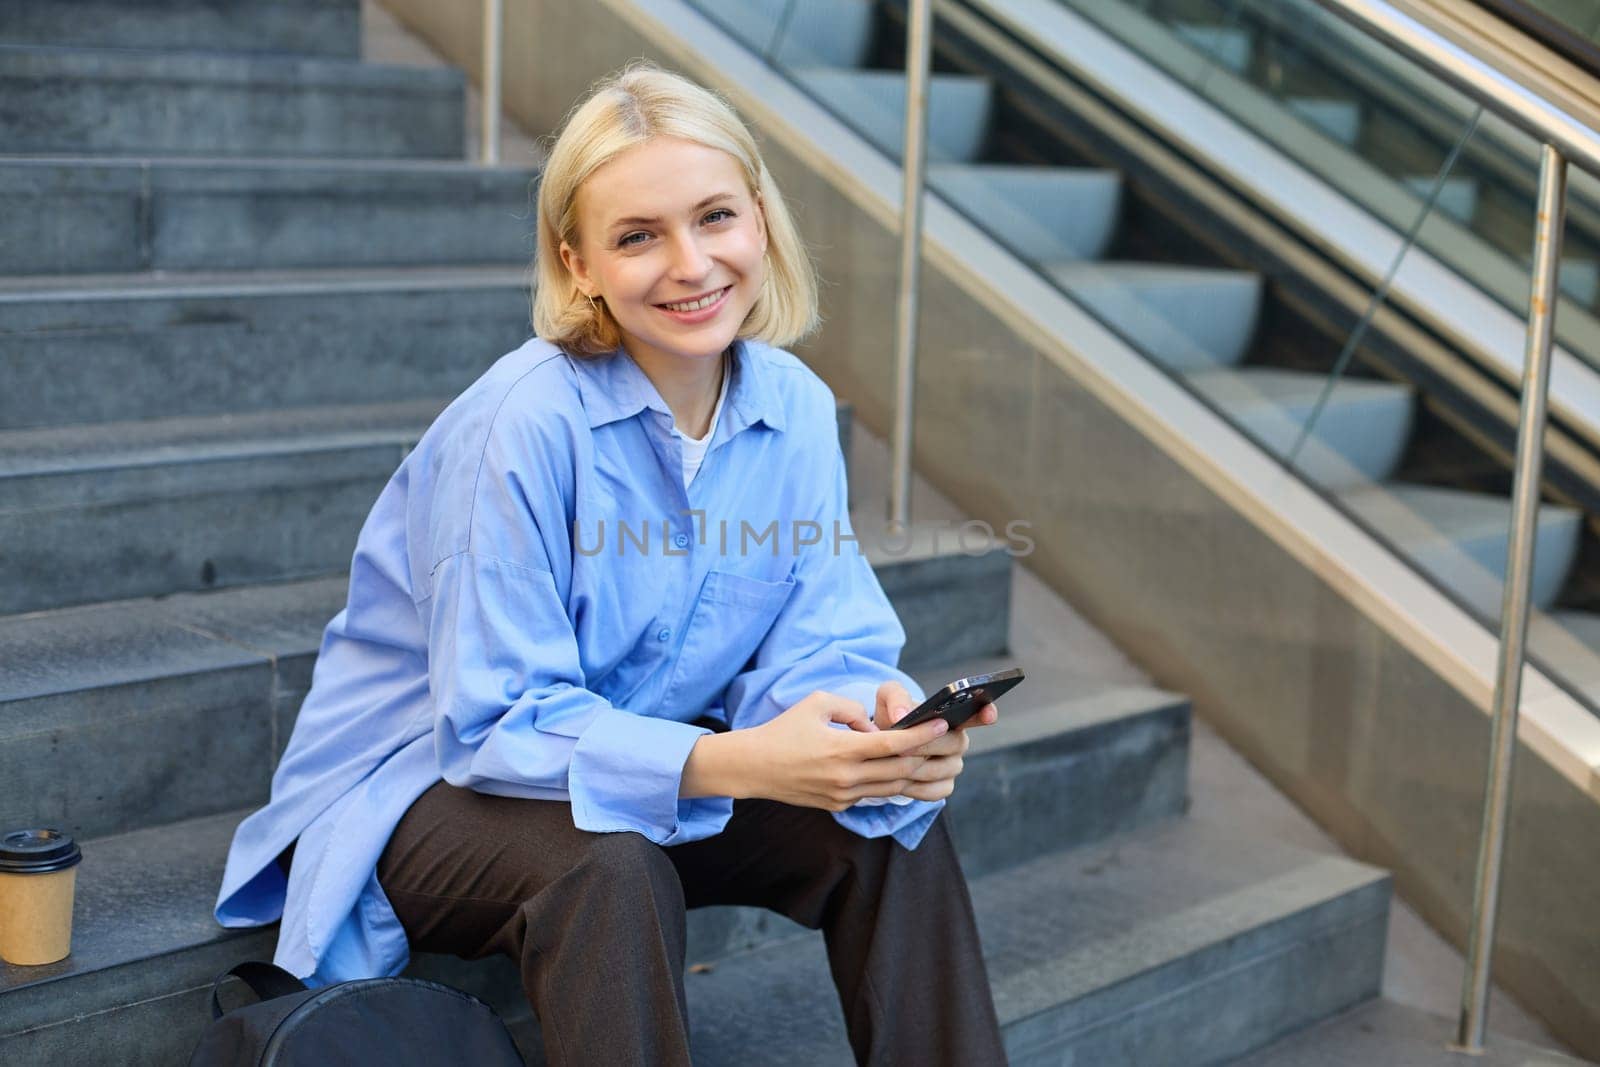 Lifestyle portrait of young urban female model, student drinks cup of takeaway coffee, sitting on stairs outdoors, using mobile phone, smiling and looking happy while taking a break by Benzoix